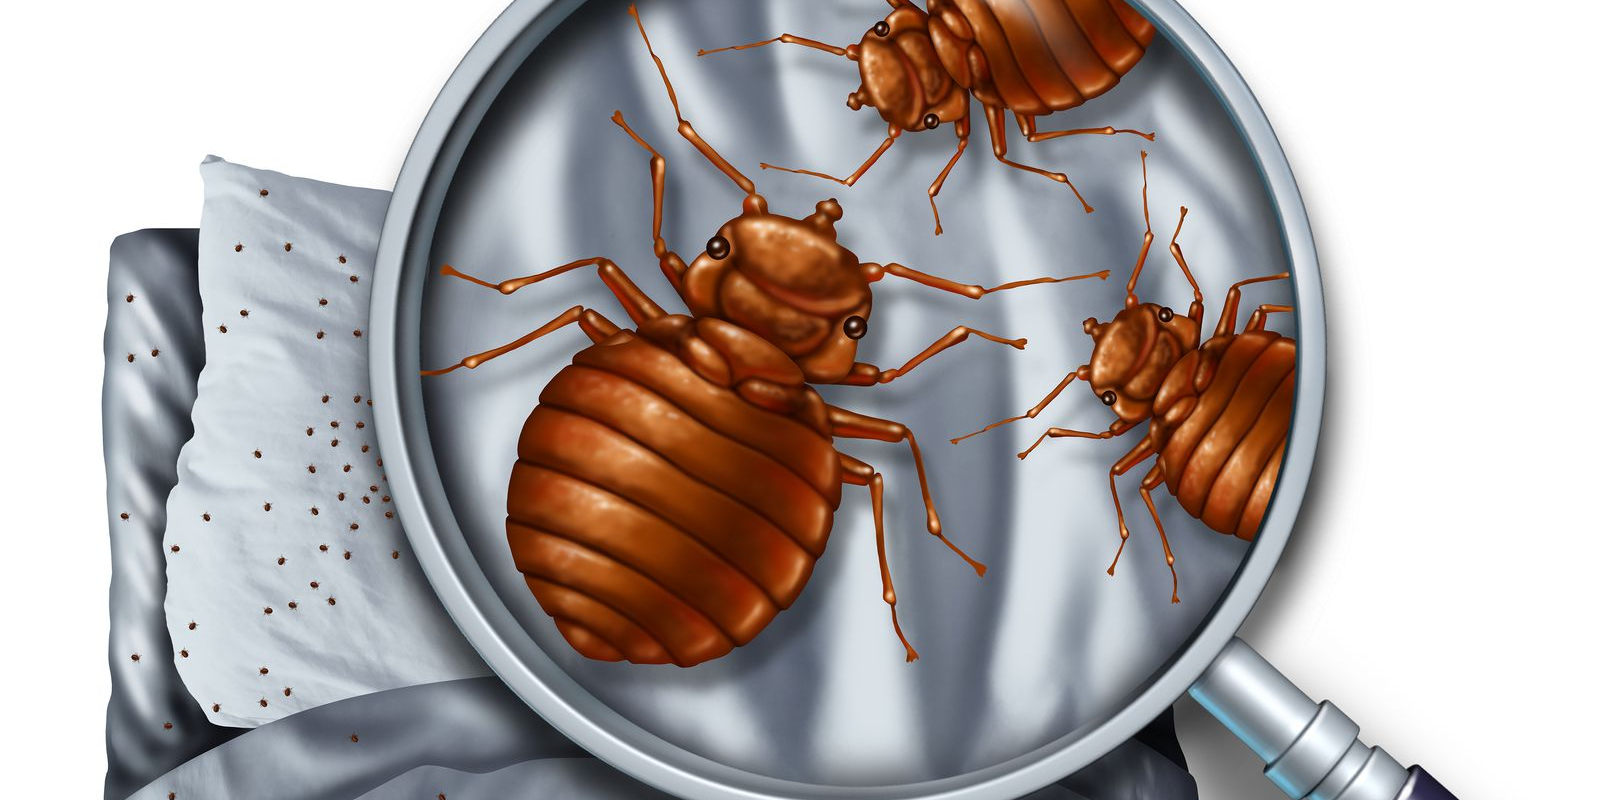 bed bugs tend to sneak into your house